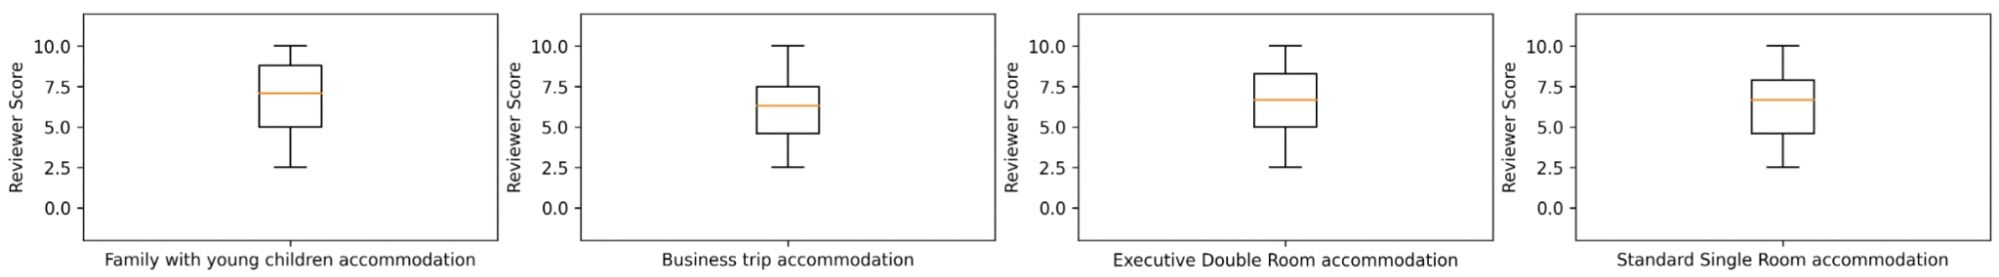 Boxplots with reviewer score for different hotel accomodations.